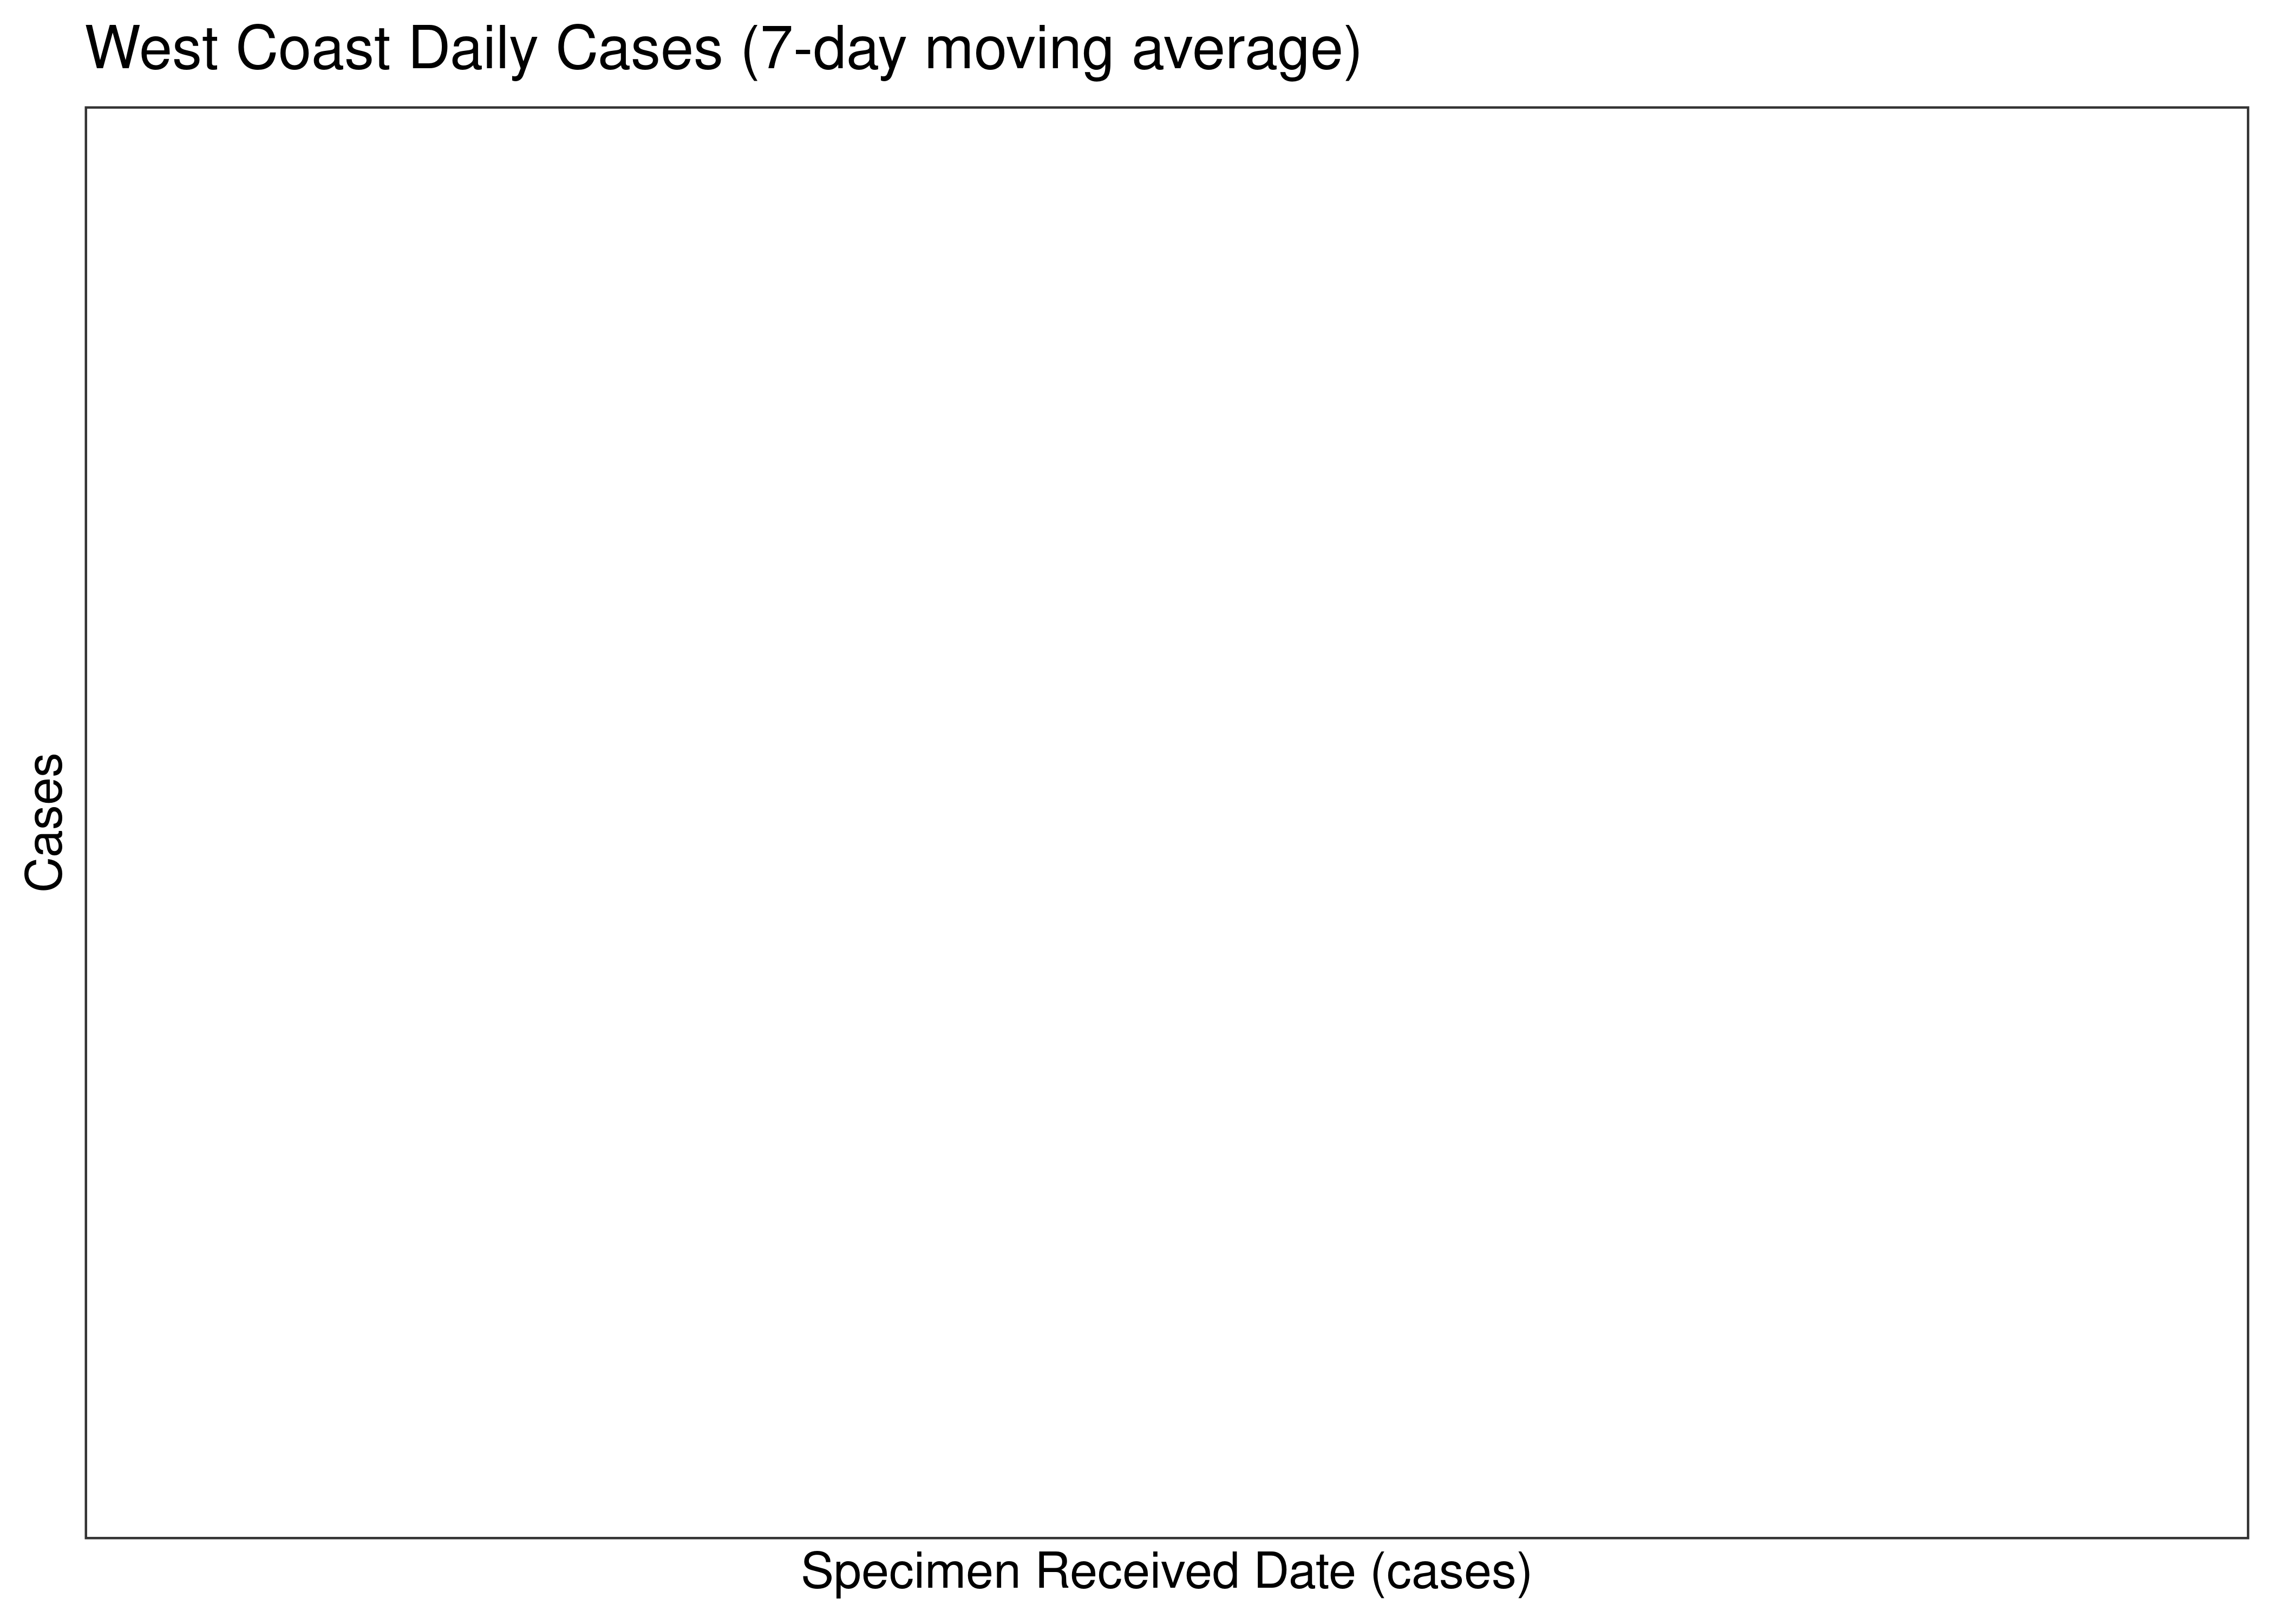 West Coast Daily Cases for Last 30-days (7-day moving average)